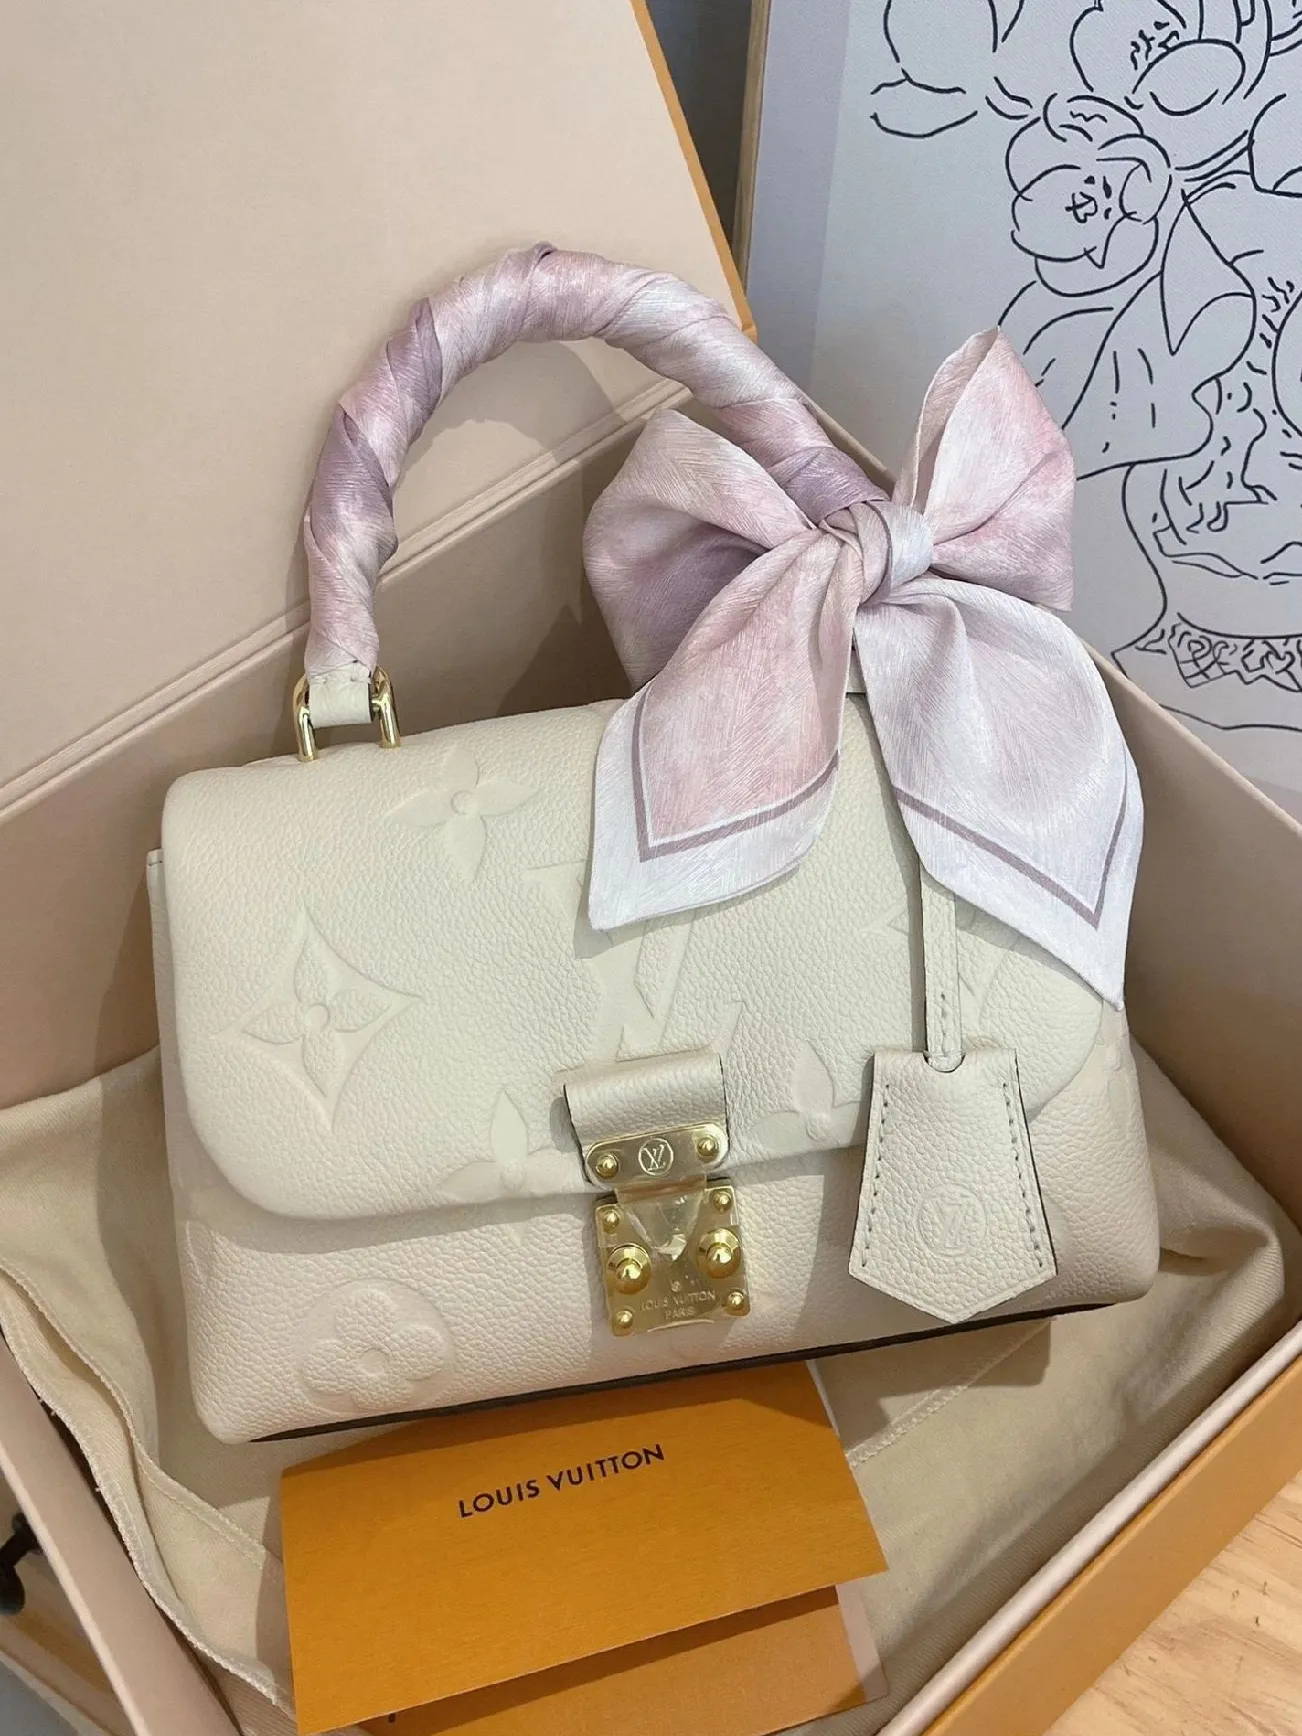 Louis Vuitton Madeleine Bag 👜, Gallery posted by Zoey 💎